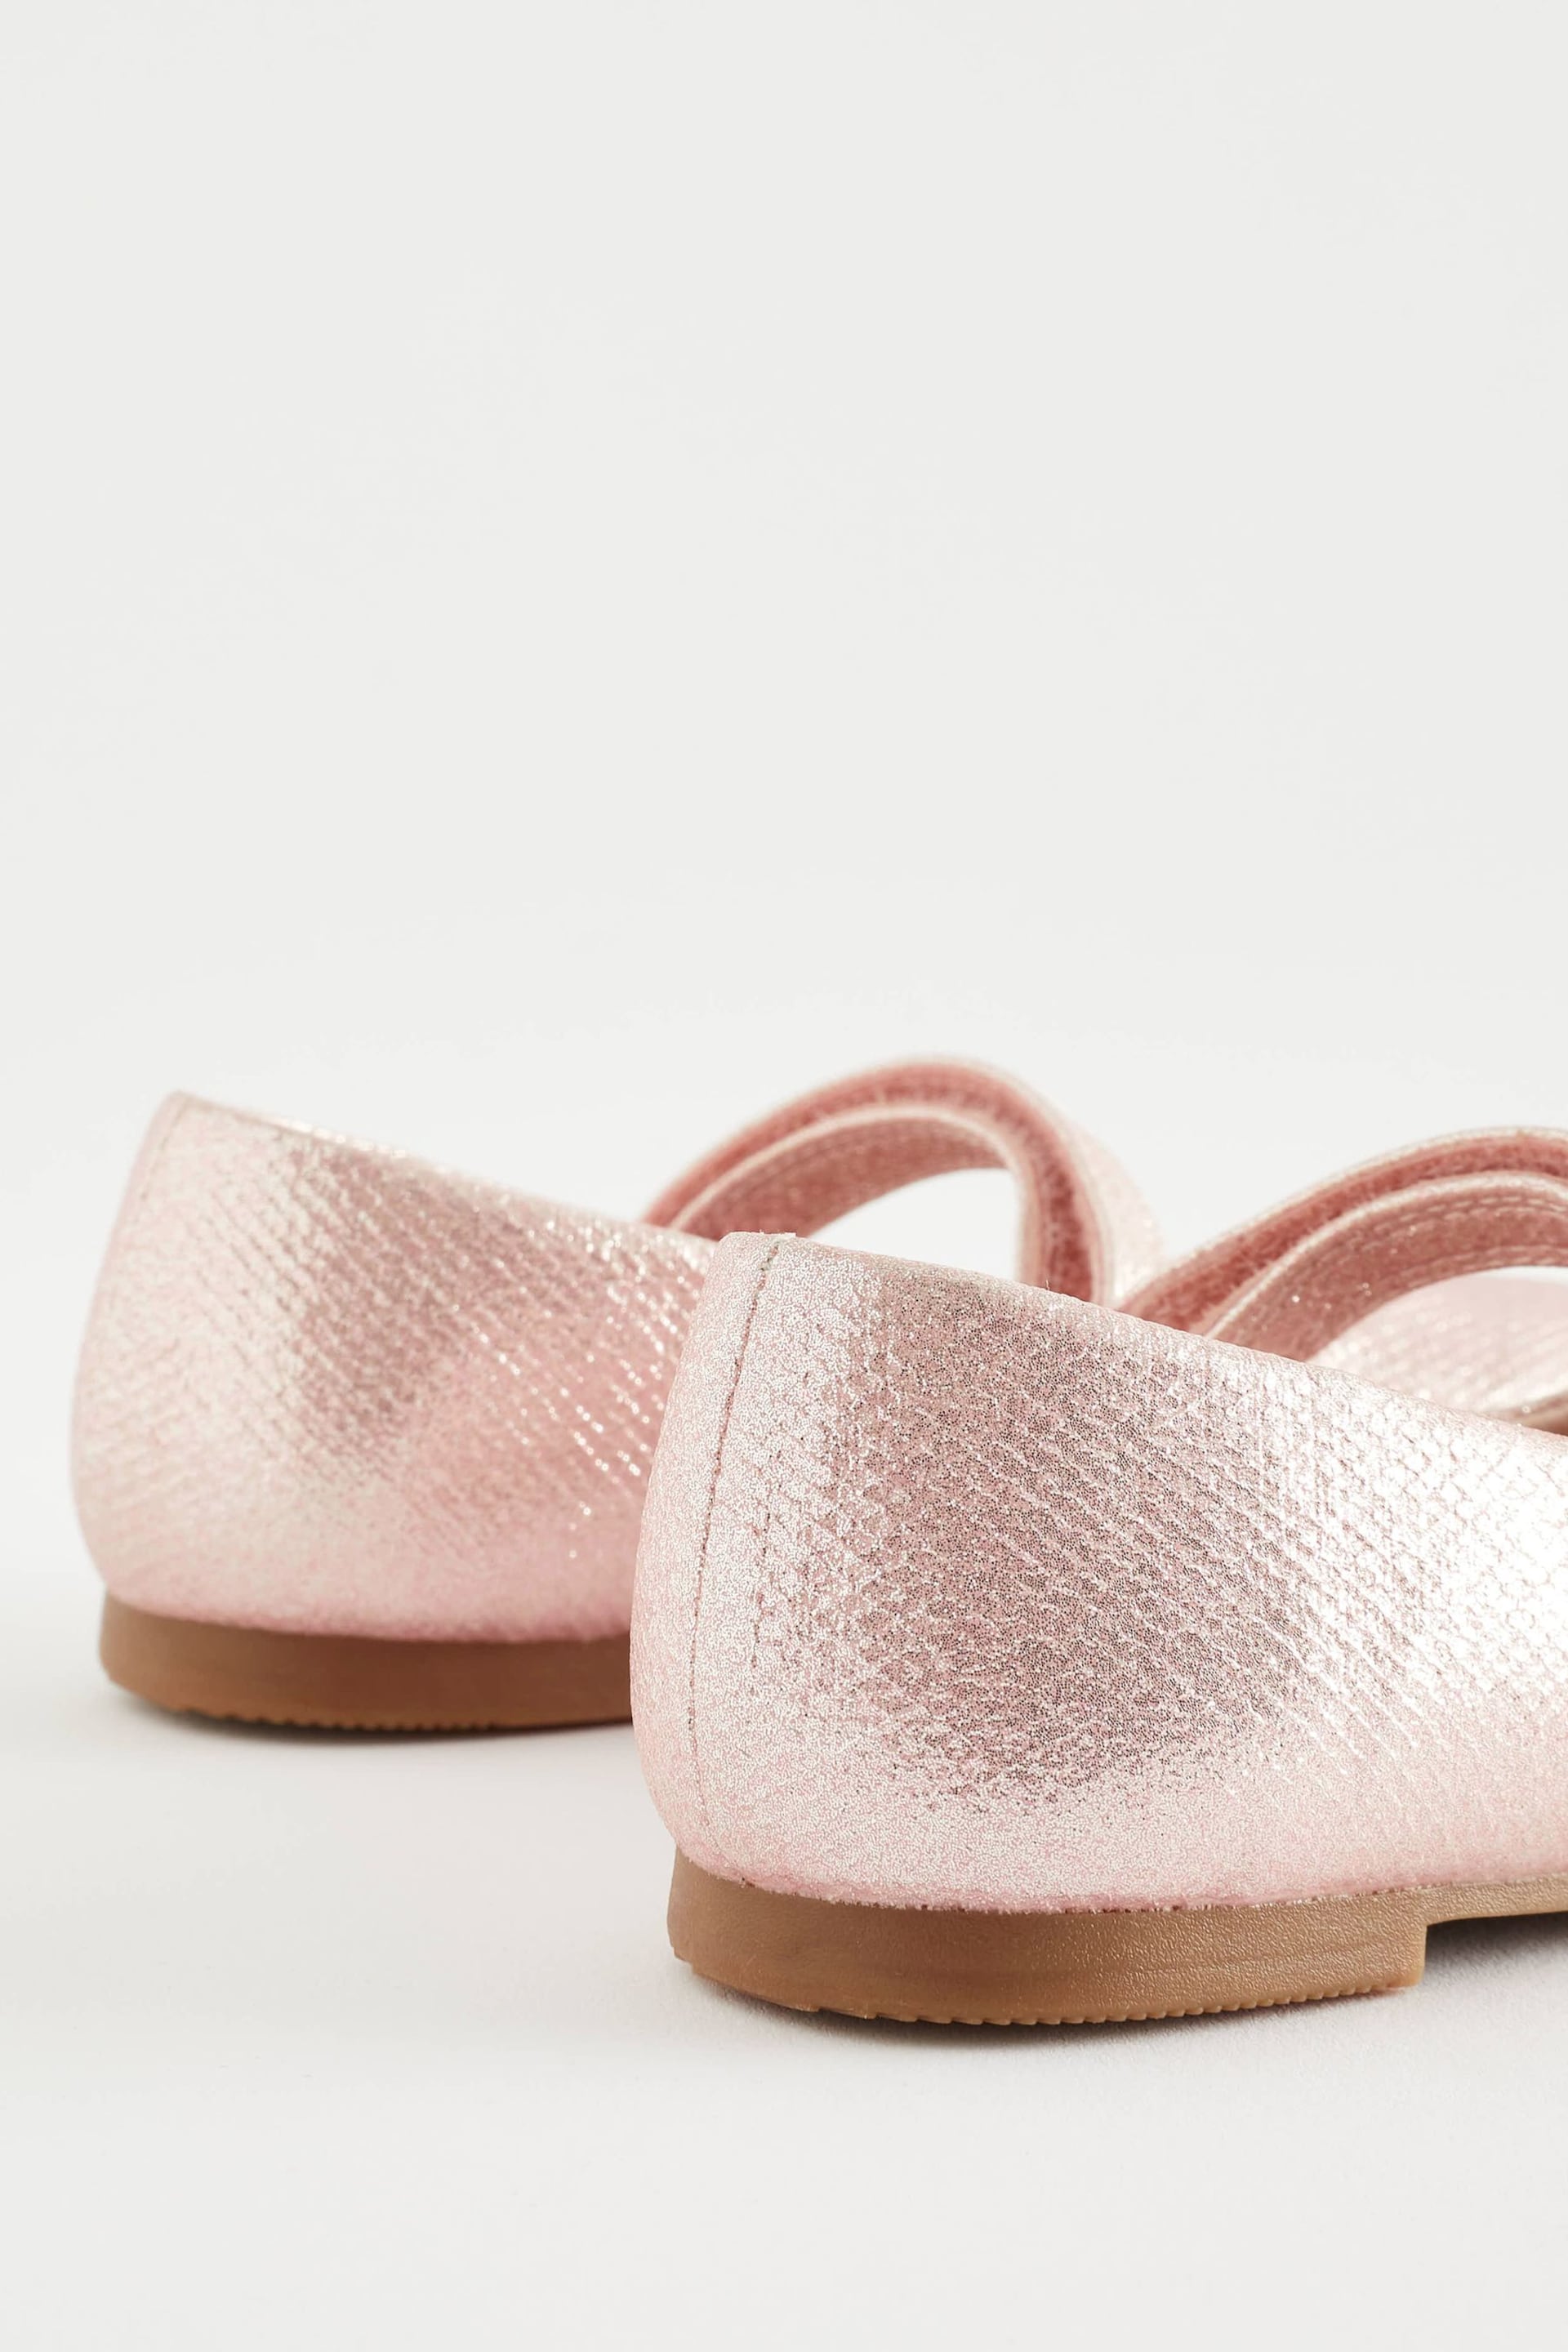 Pink Standard Fit (F) Mary Jane Occasion Shoes - Image 7 of 8